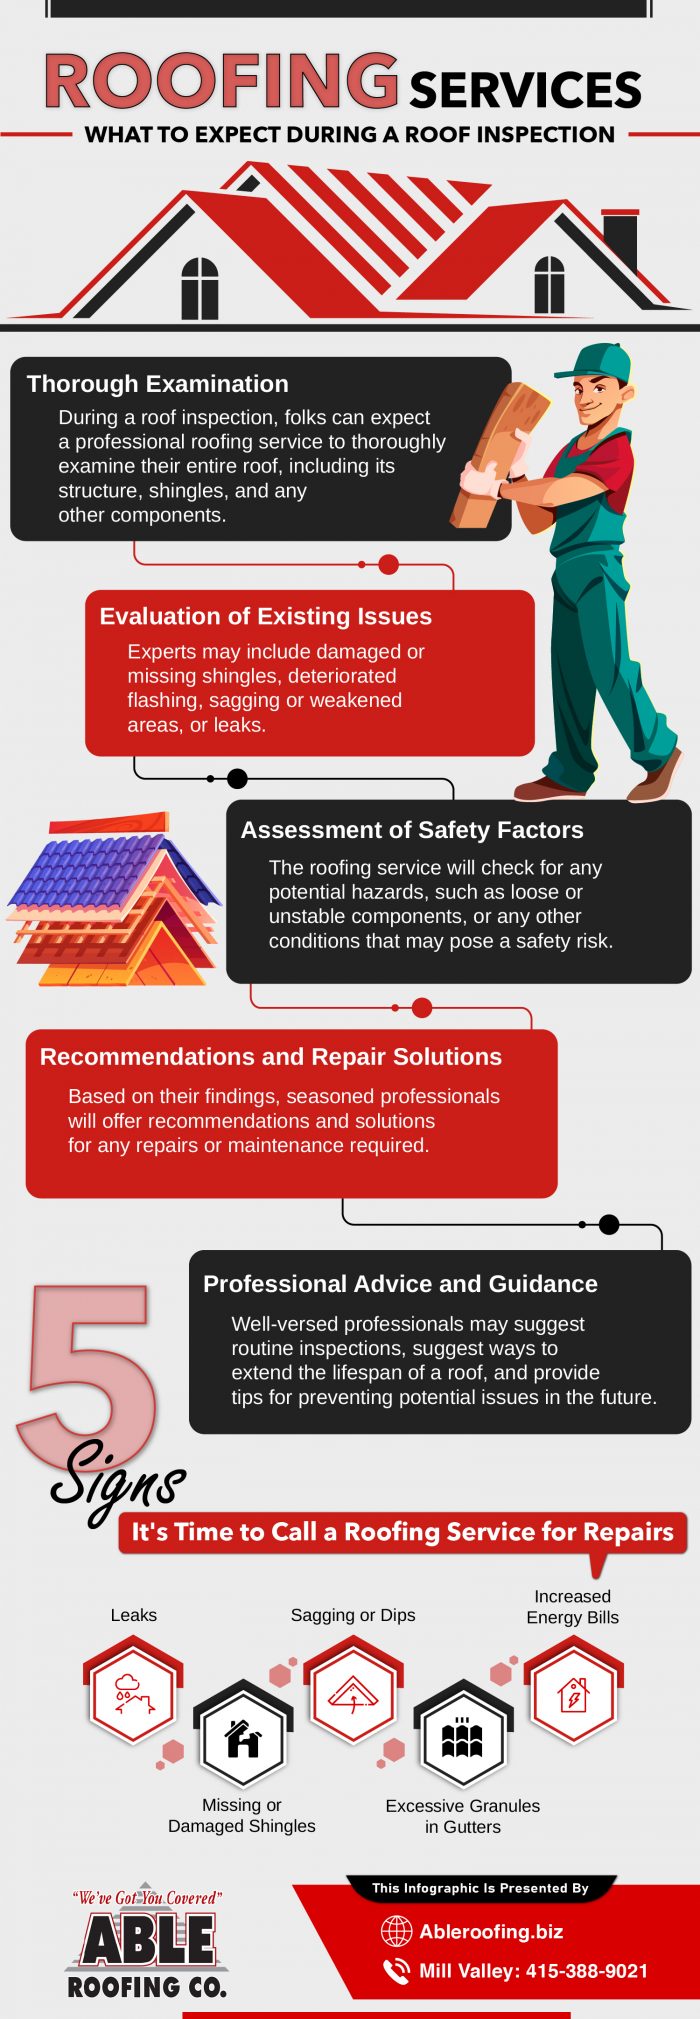 Get Roof Inspections with Our Experts